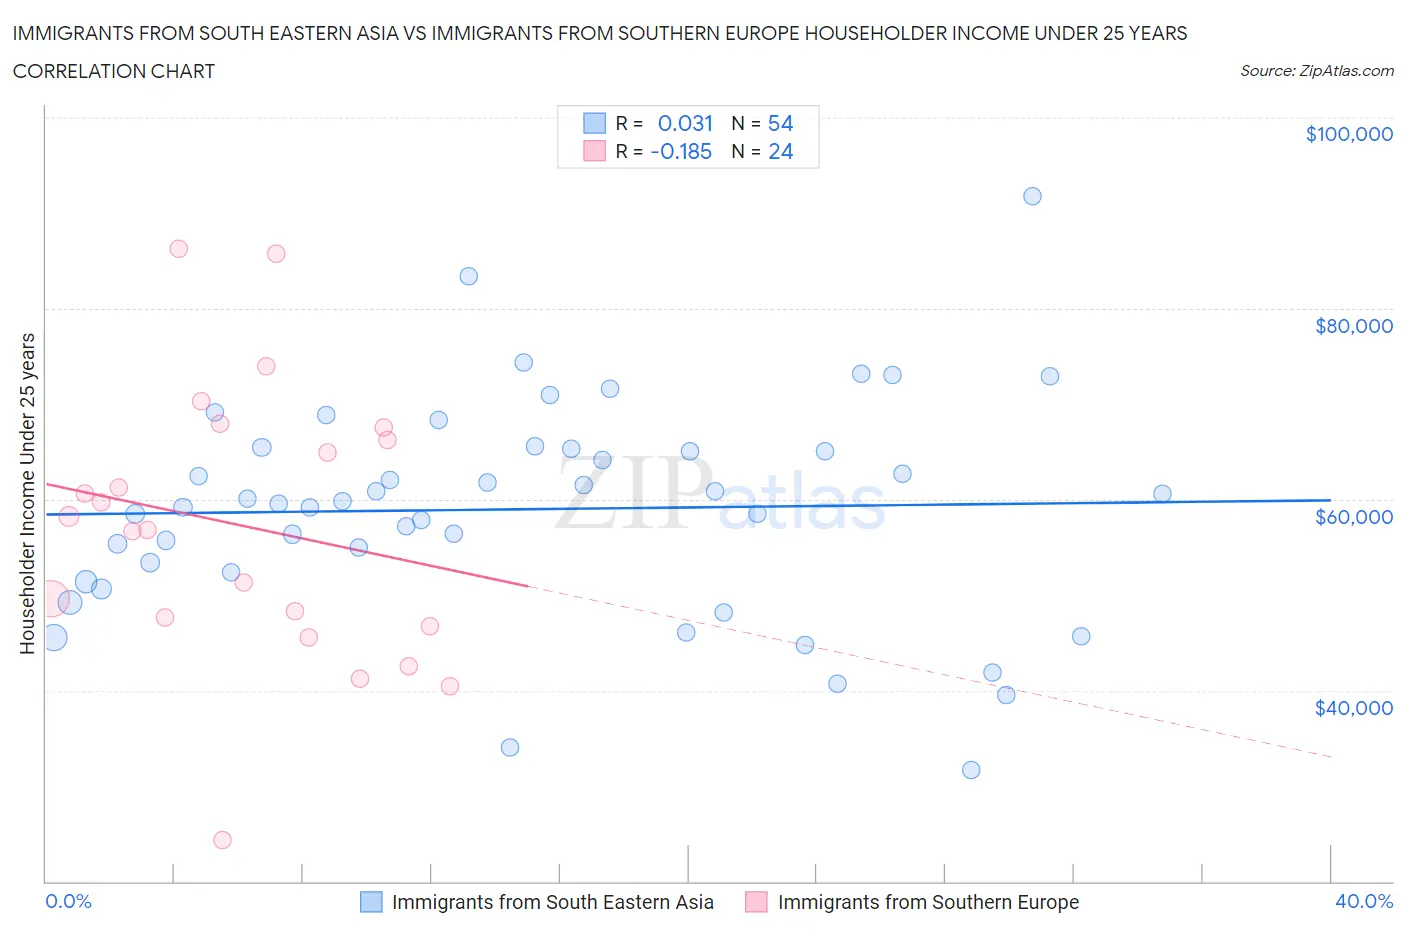 Immigrants from South Eastern Asia vs Immigrants from Southern Europe Householder Income Under 25 years